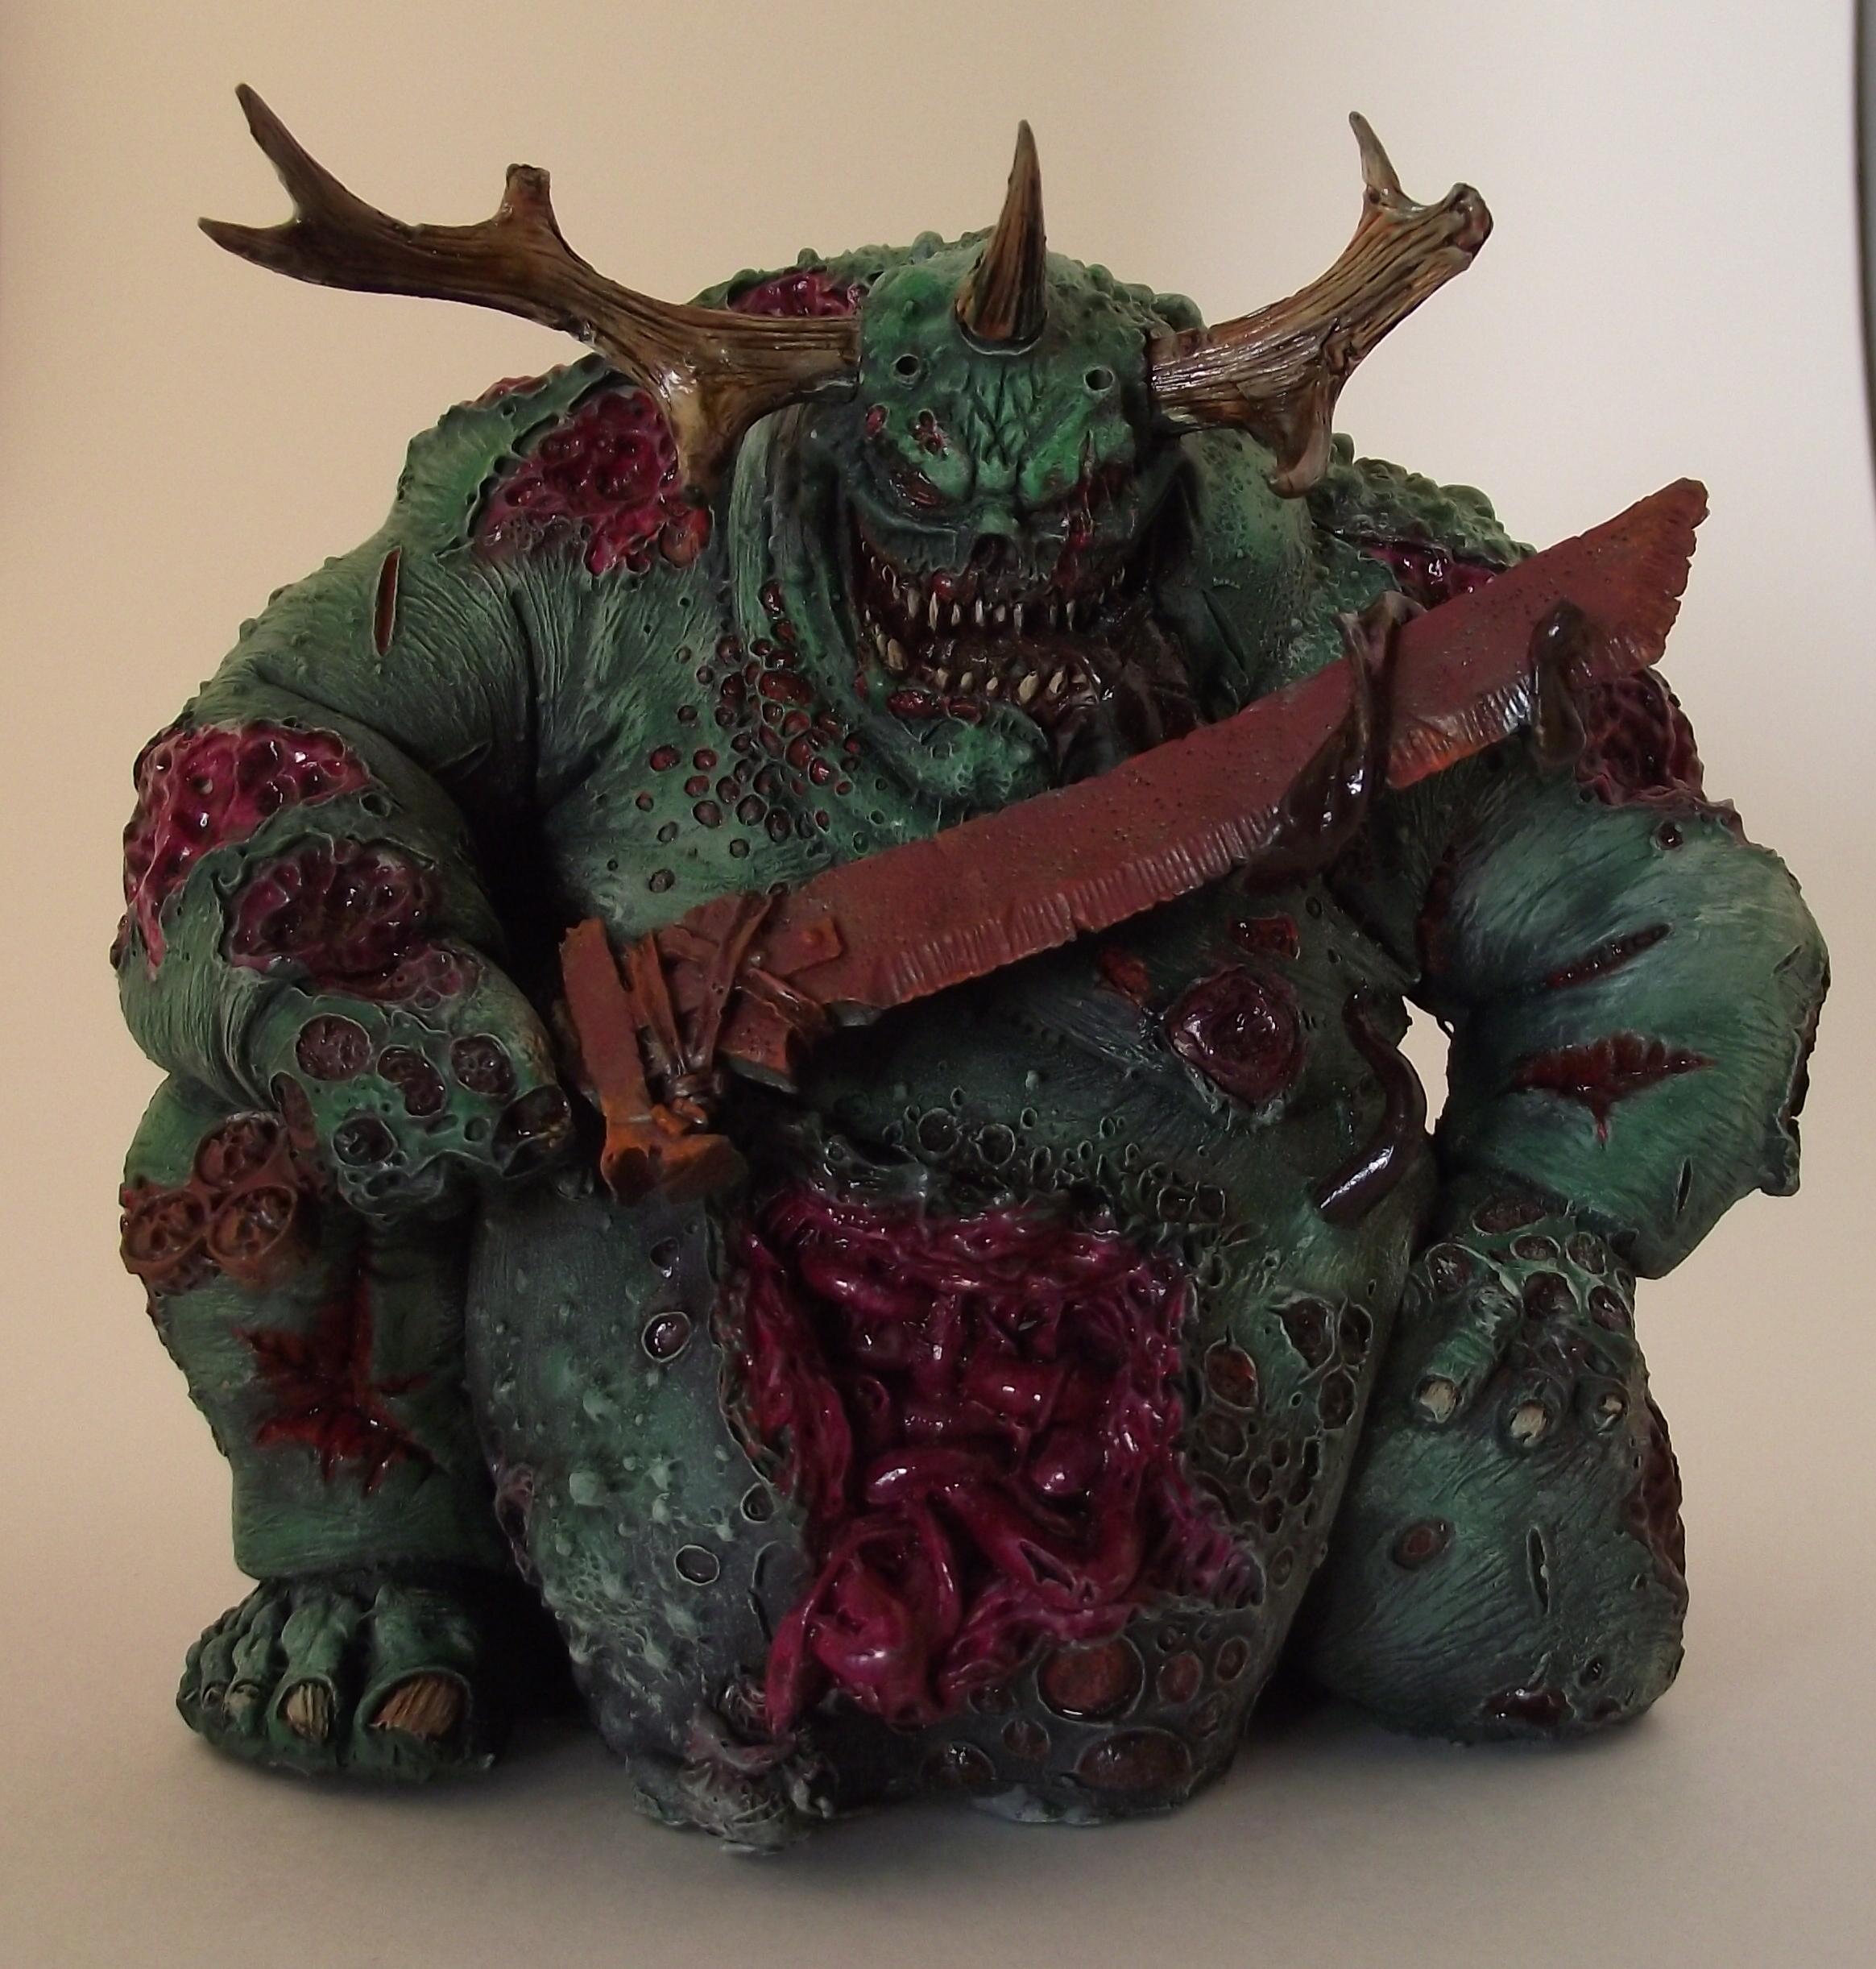 Chaos Daemons, Greater Daemon, Nurgle, Unclean One, Warhammer 40,000